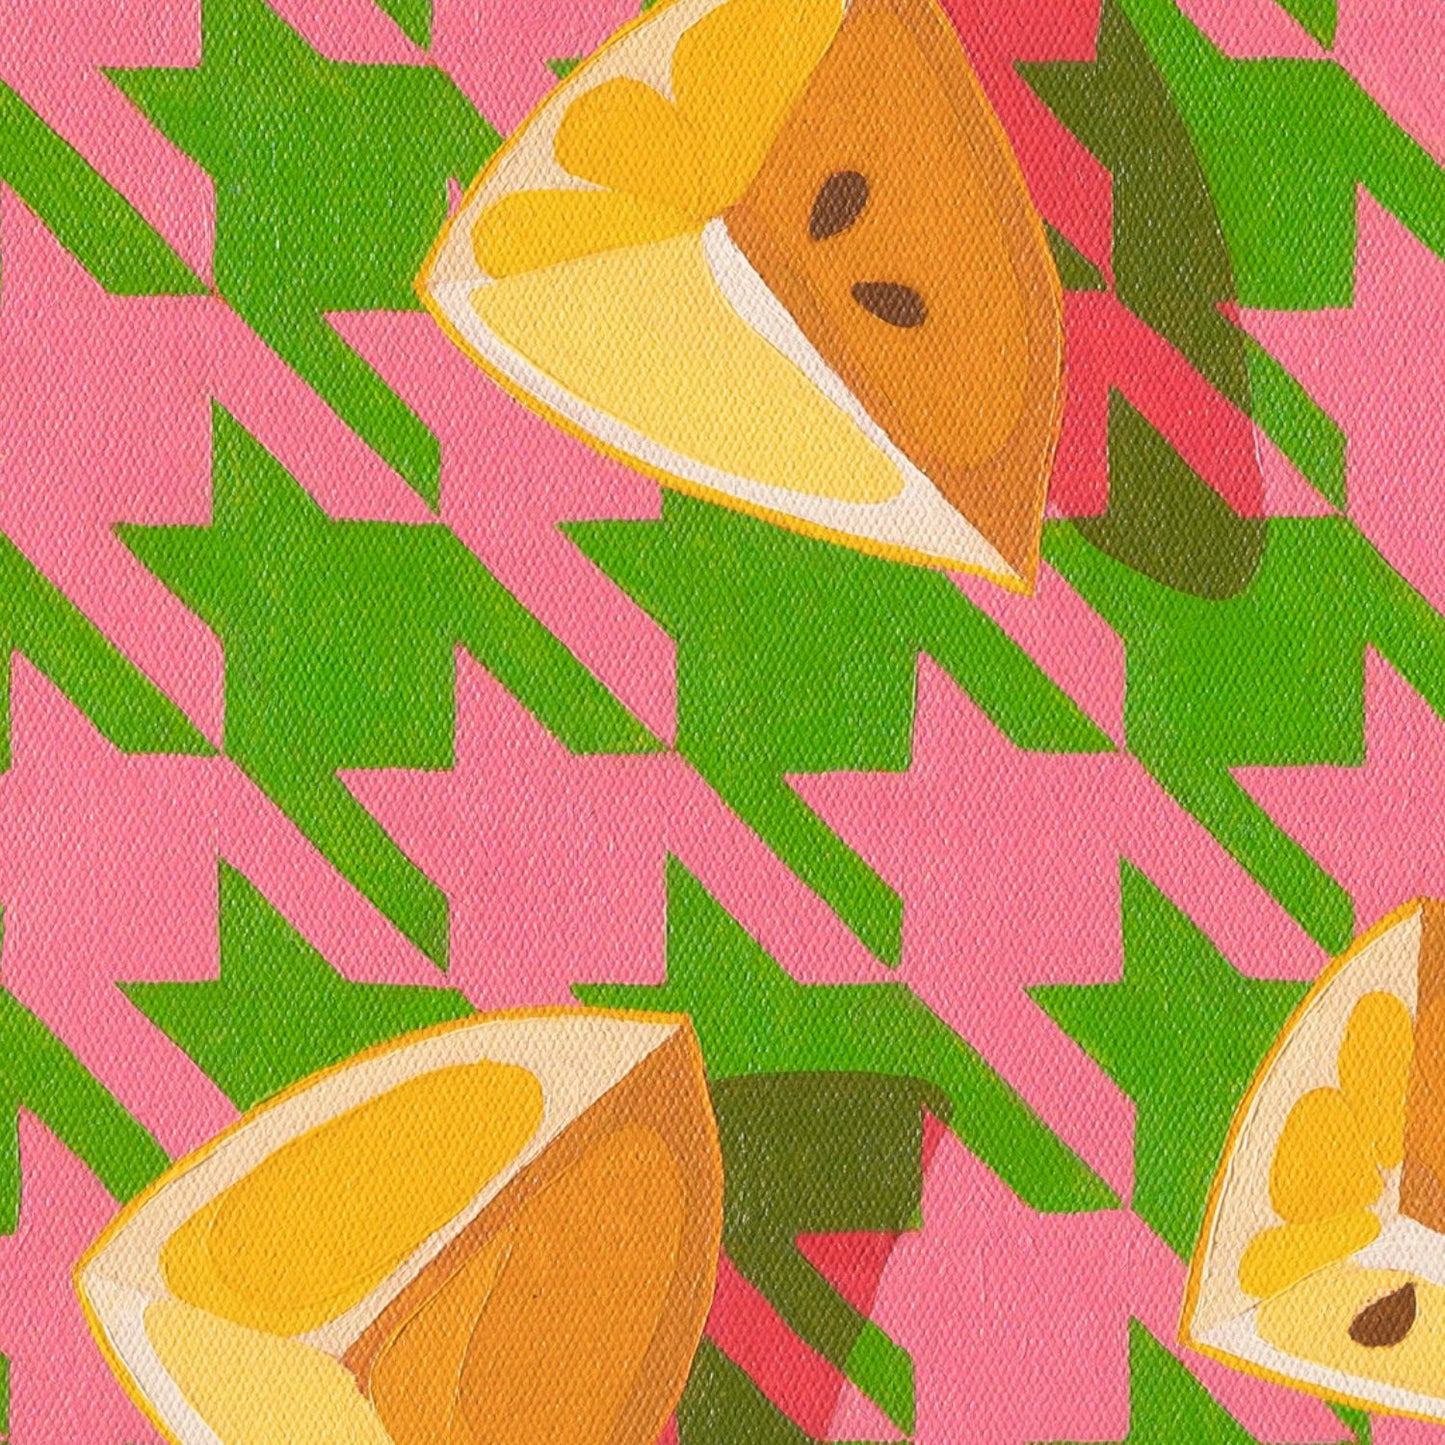 fine art print of a colorful and modern original oil painting of bright yellow lemons on a pink and green houndstooth background with strong shadows